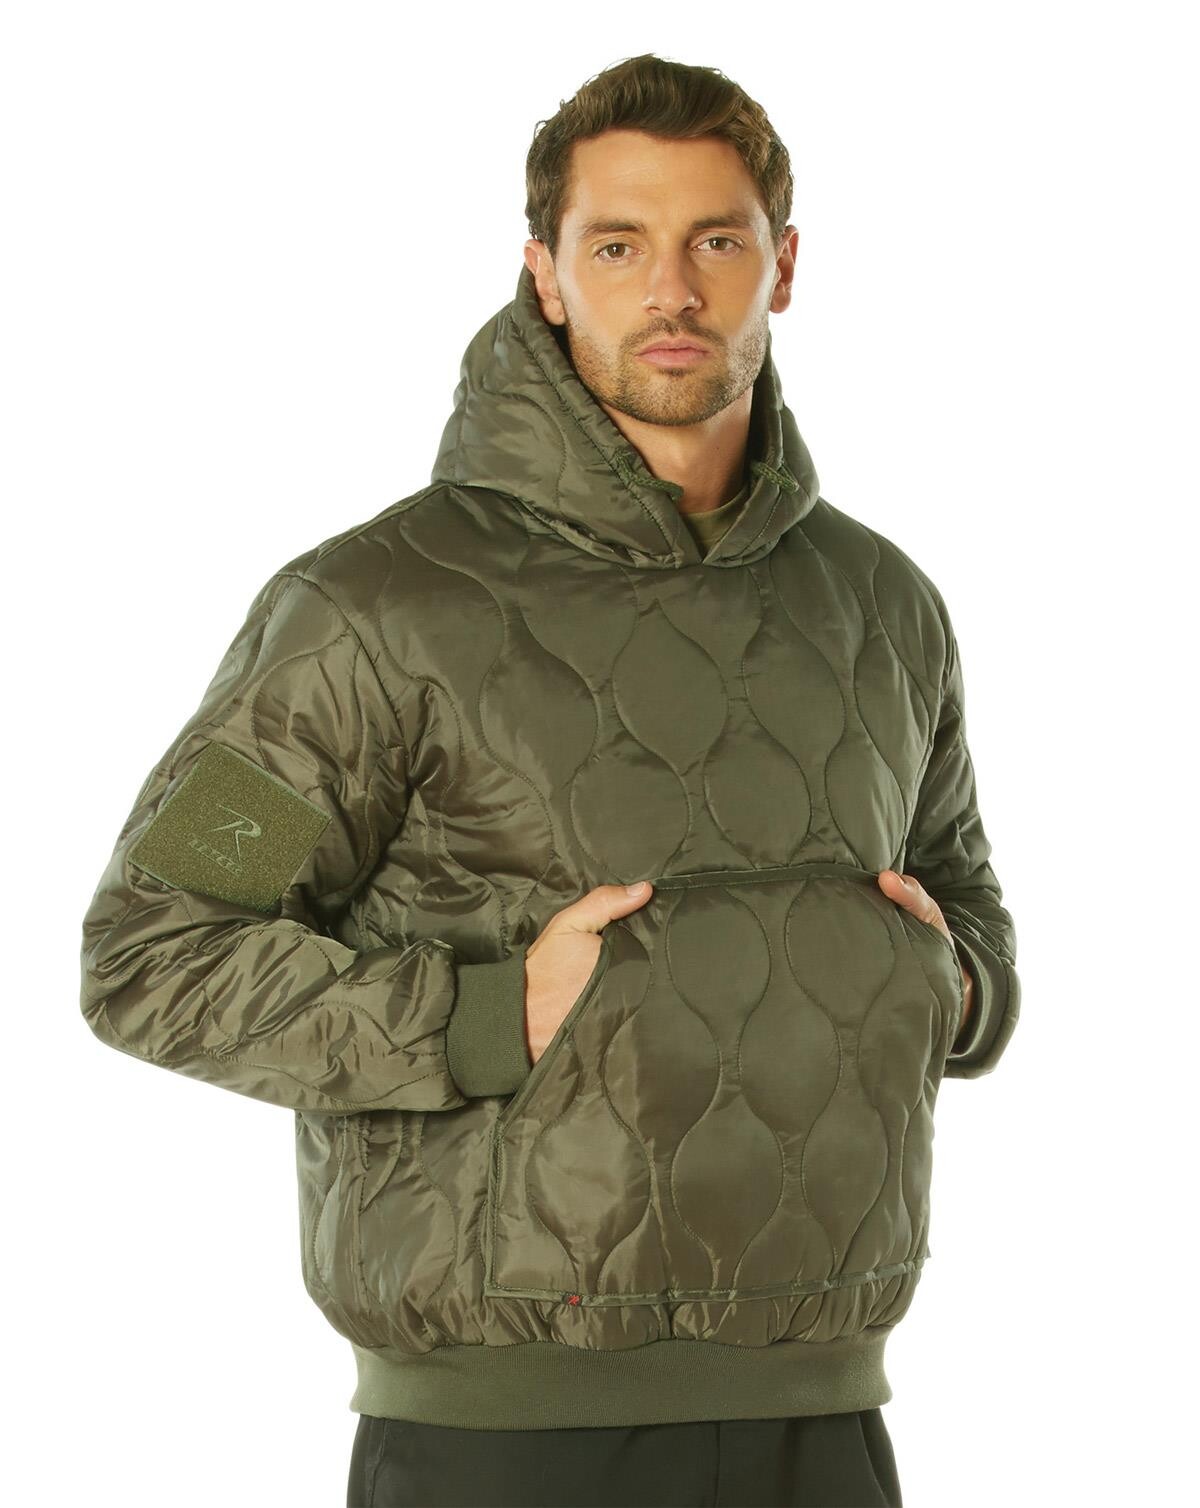 9: Rothco Quilted Woobie Hooded Sweatshirt (Oliven, S)